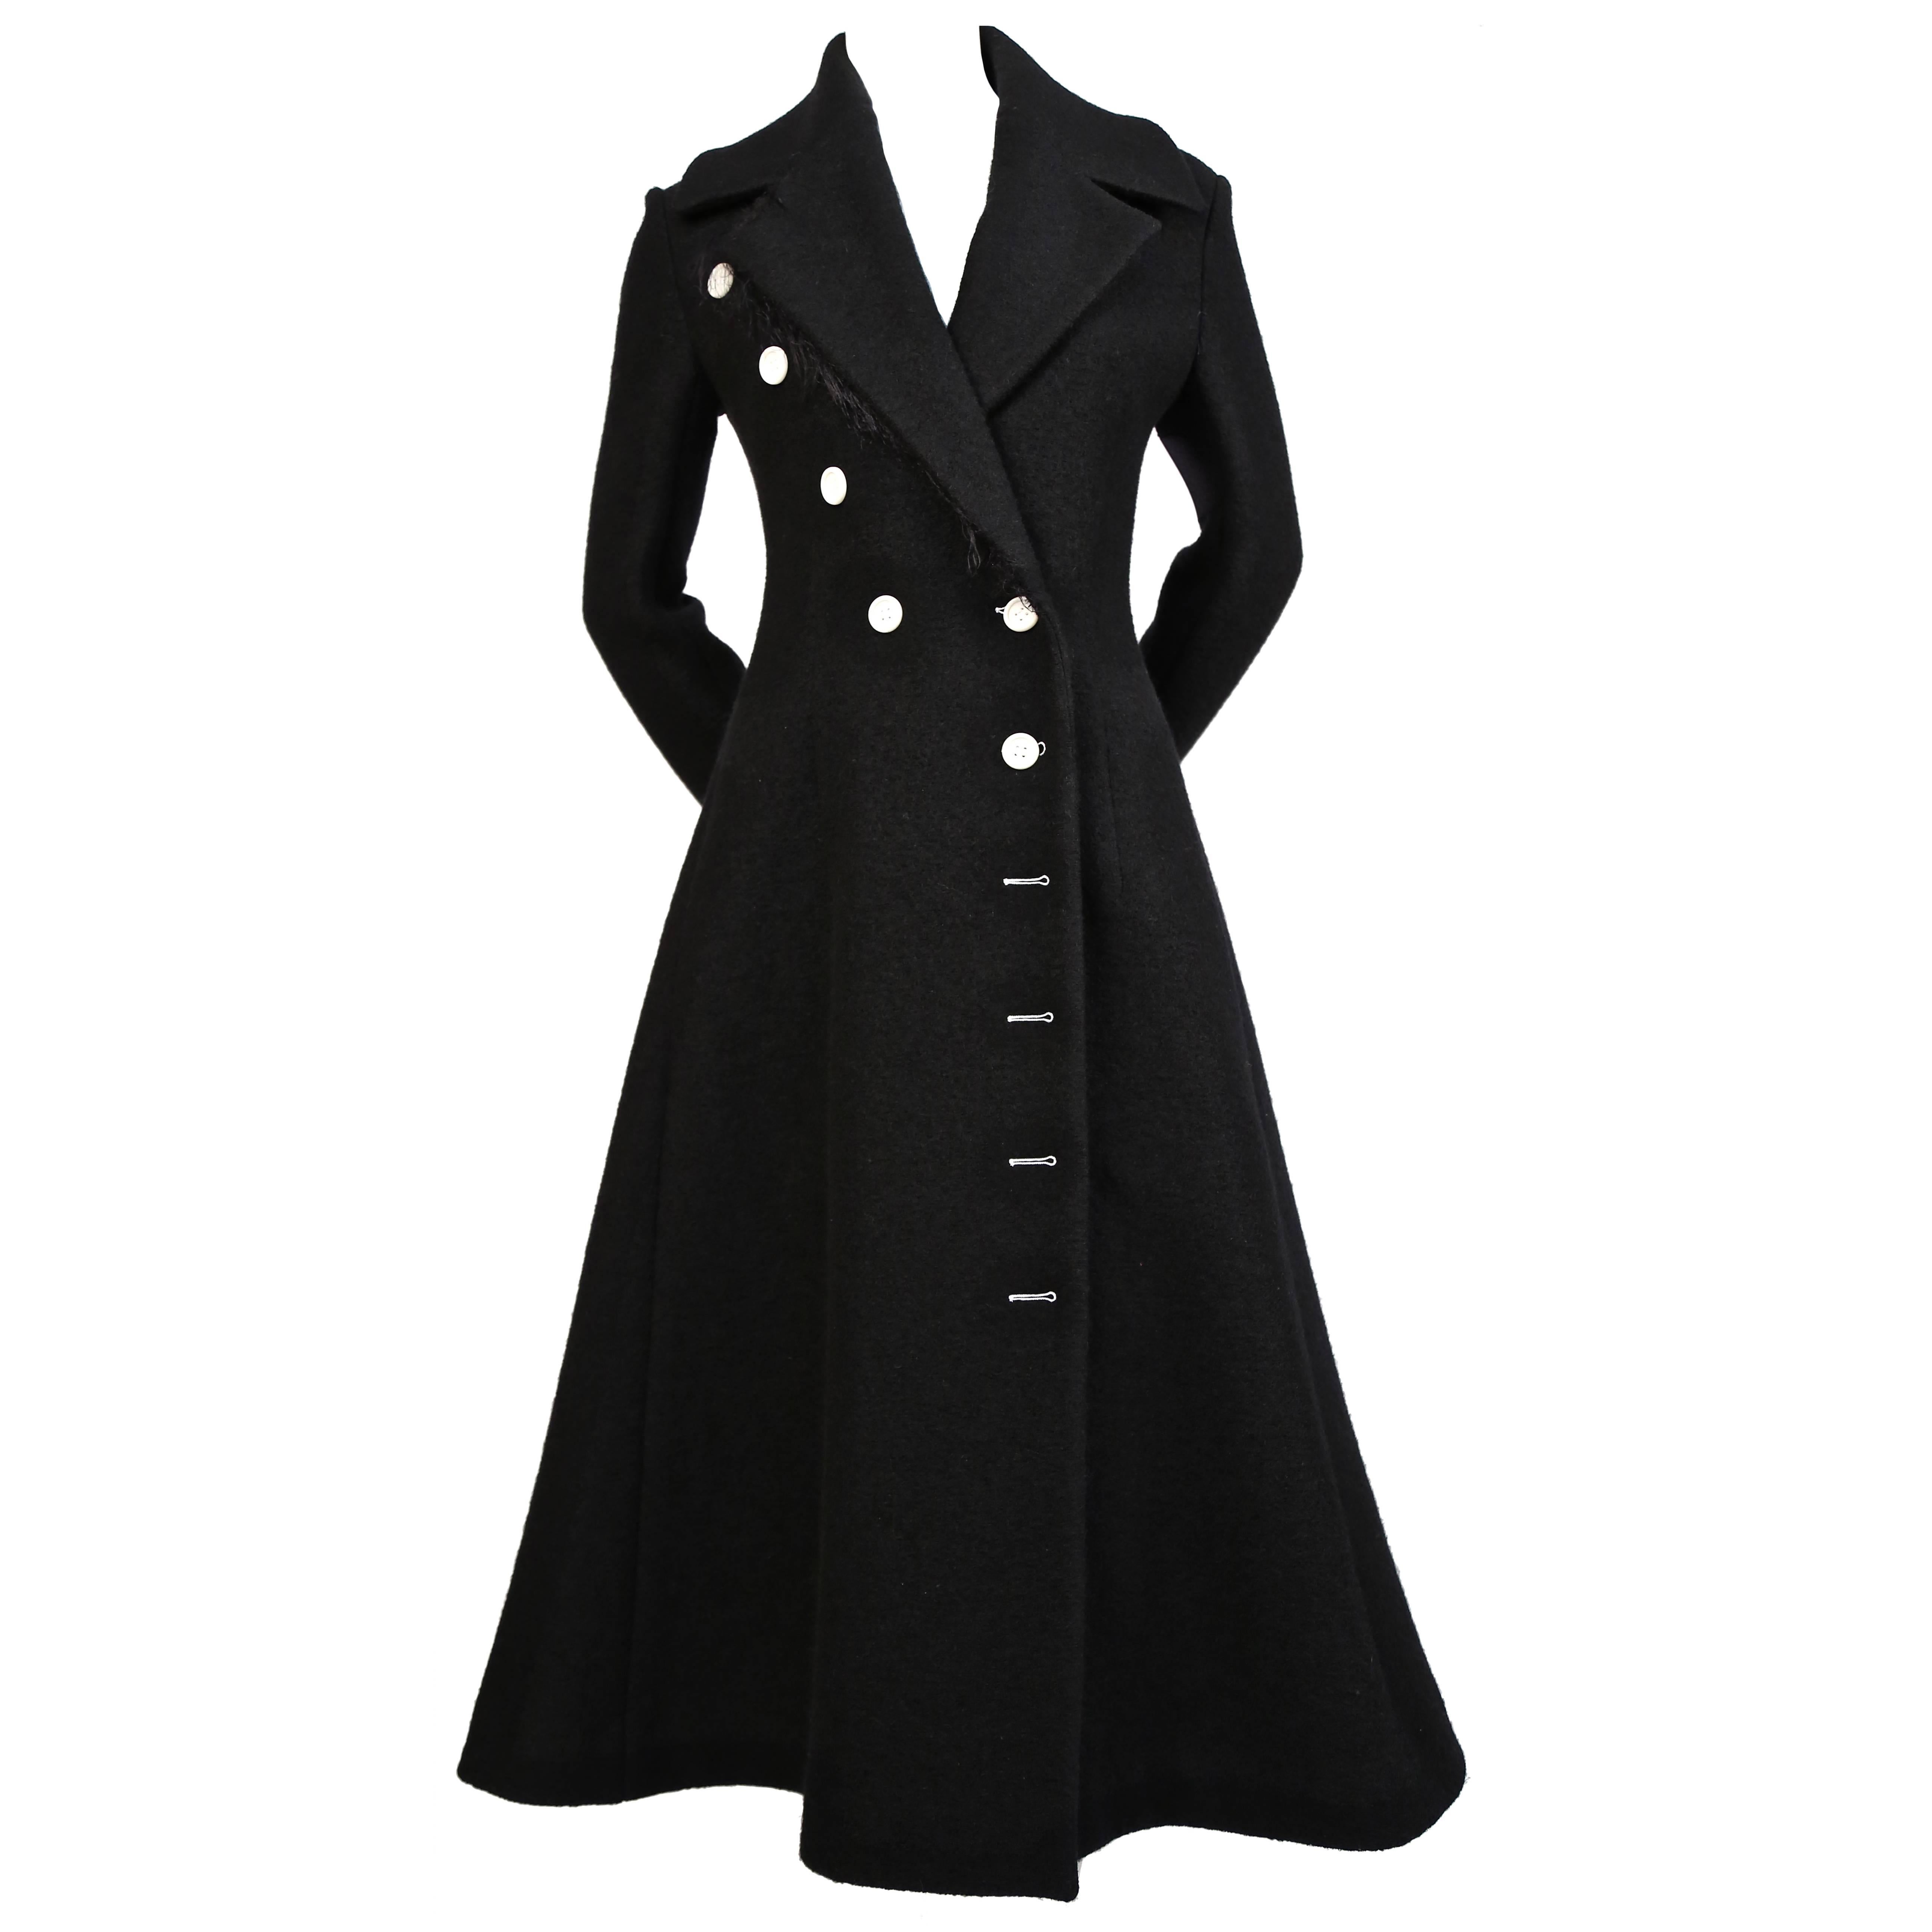 Jet-black, textured wool coat with asymmetrical buttons and fringe trim at back of sleeves designed by Phoebe Philo for Celine as seen on the fall 2014 runway. French size 38 which fits a US 4. Approximate measurements: shoulders 16